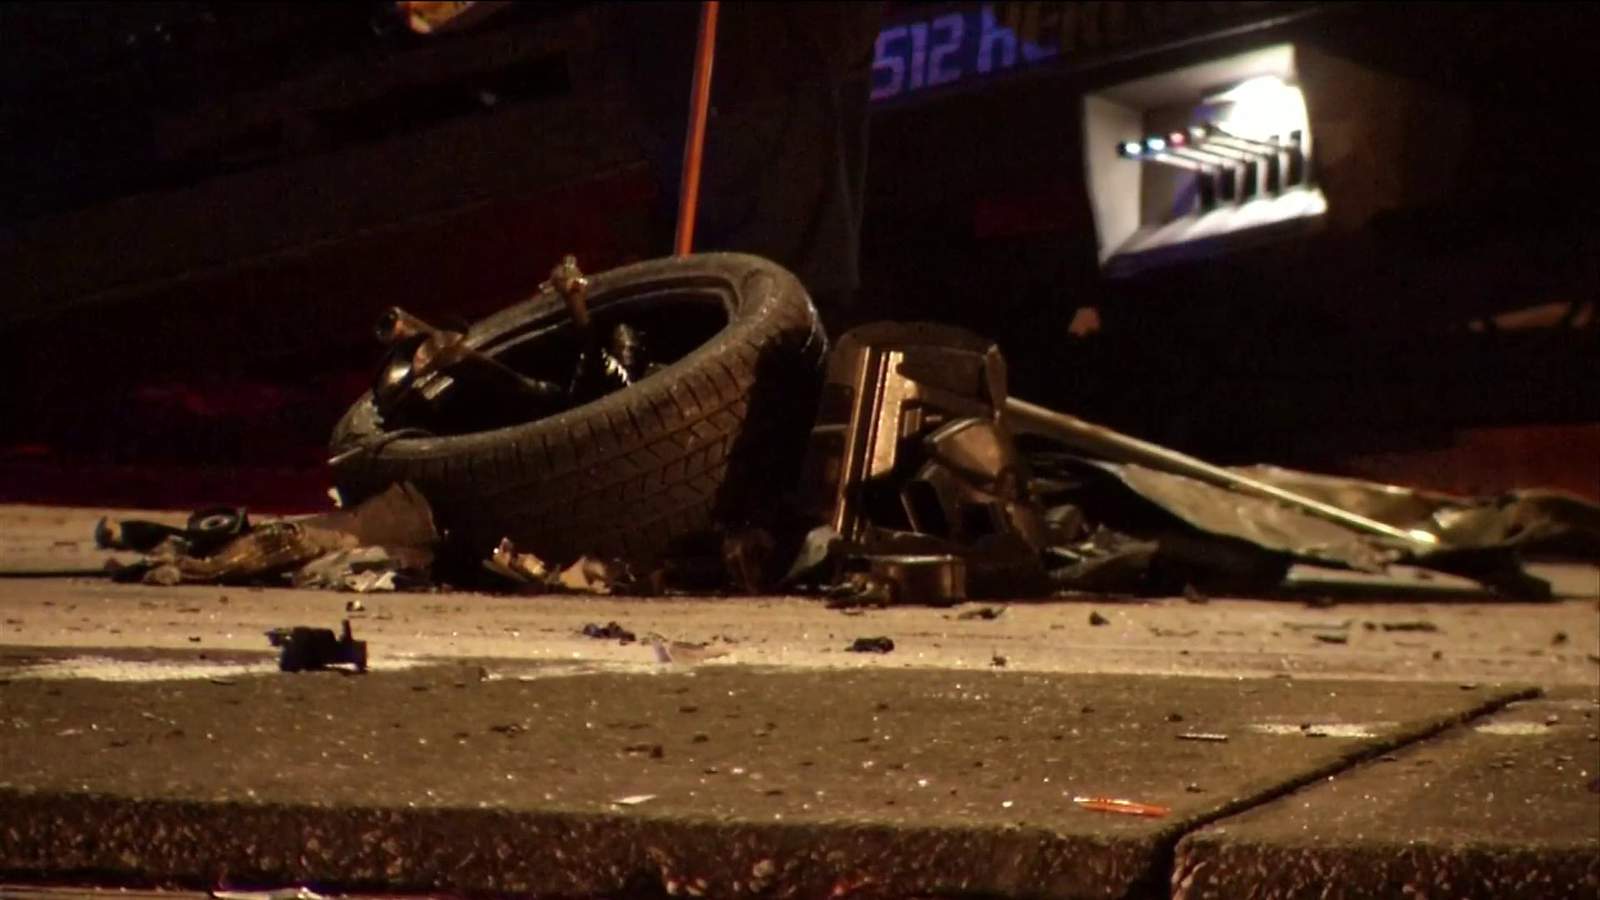 2 dead, 1 injured in crash at Roosevelt Boulevard & Plymouth Street, police say